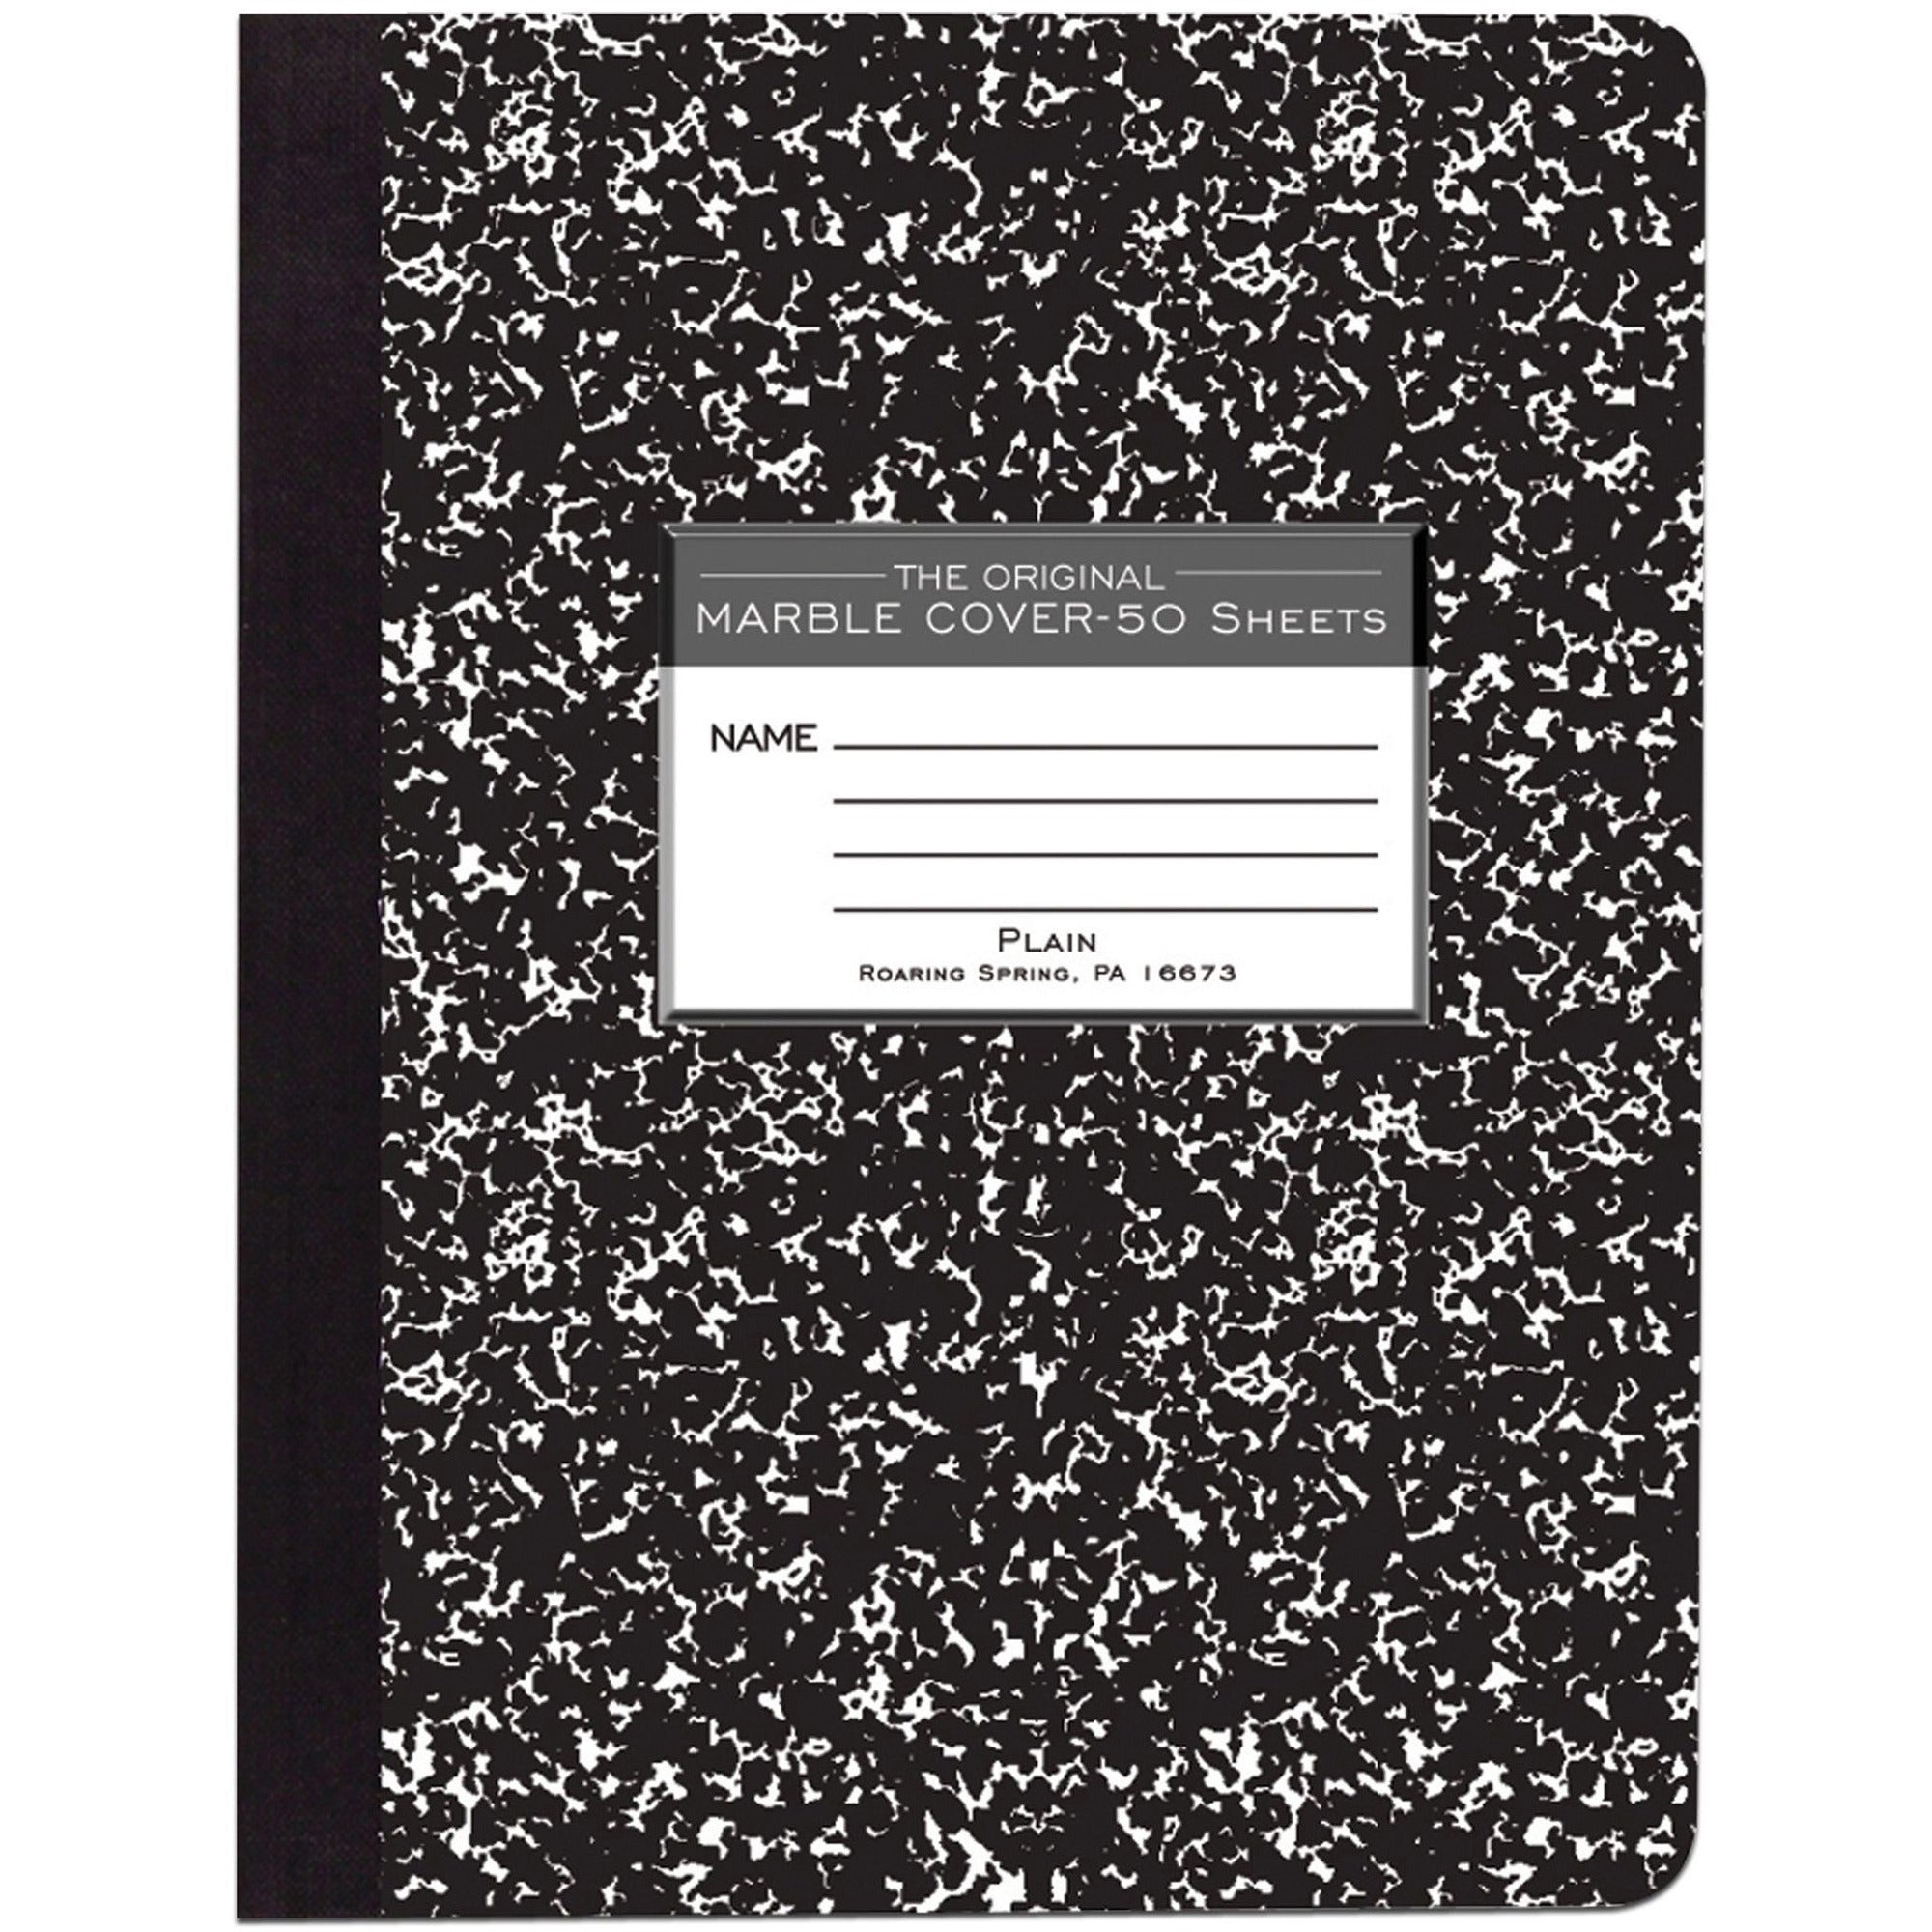 Roaring Spring Unruled Hard Cover Composition Book - 50 Sheets - 100 Pages - Plain - Sewn/Tapebound - 15 lb Basis Weight - 56 g/m2 Grammage - 9 3/4" x 7 1/2" - 0.25" x 7.5" x 9.8" - White Paper - Black Binding - 1 Each - 